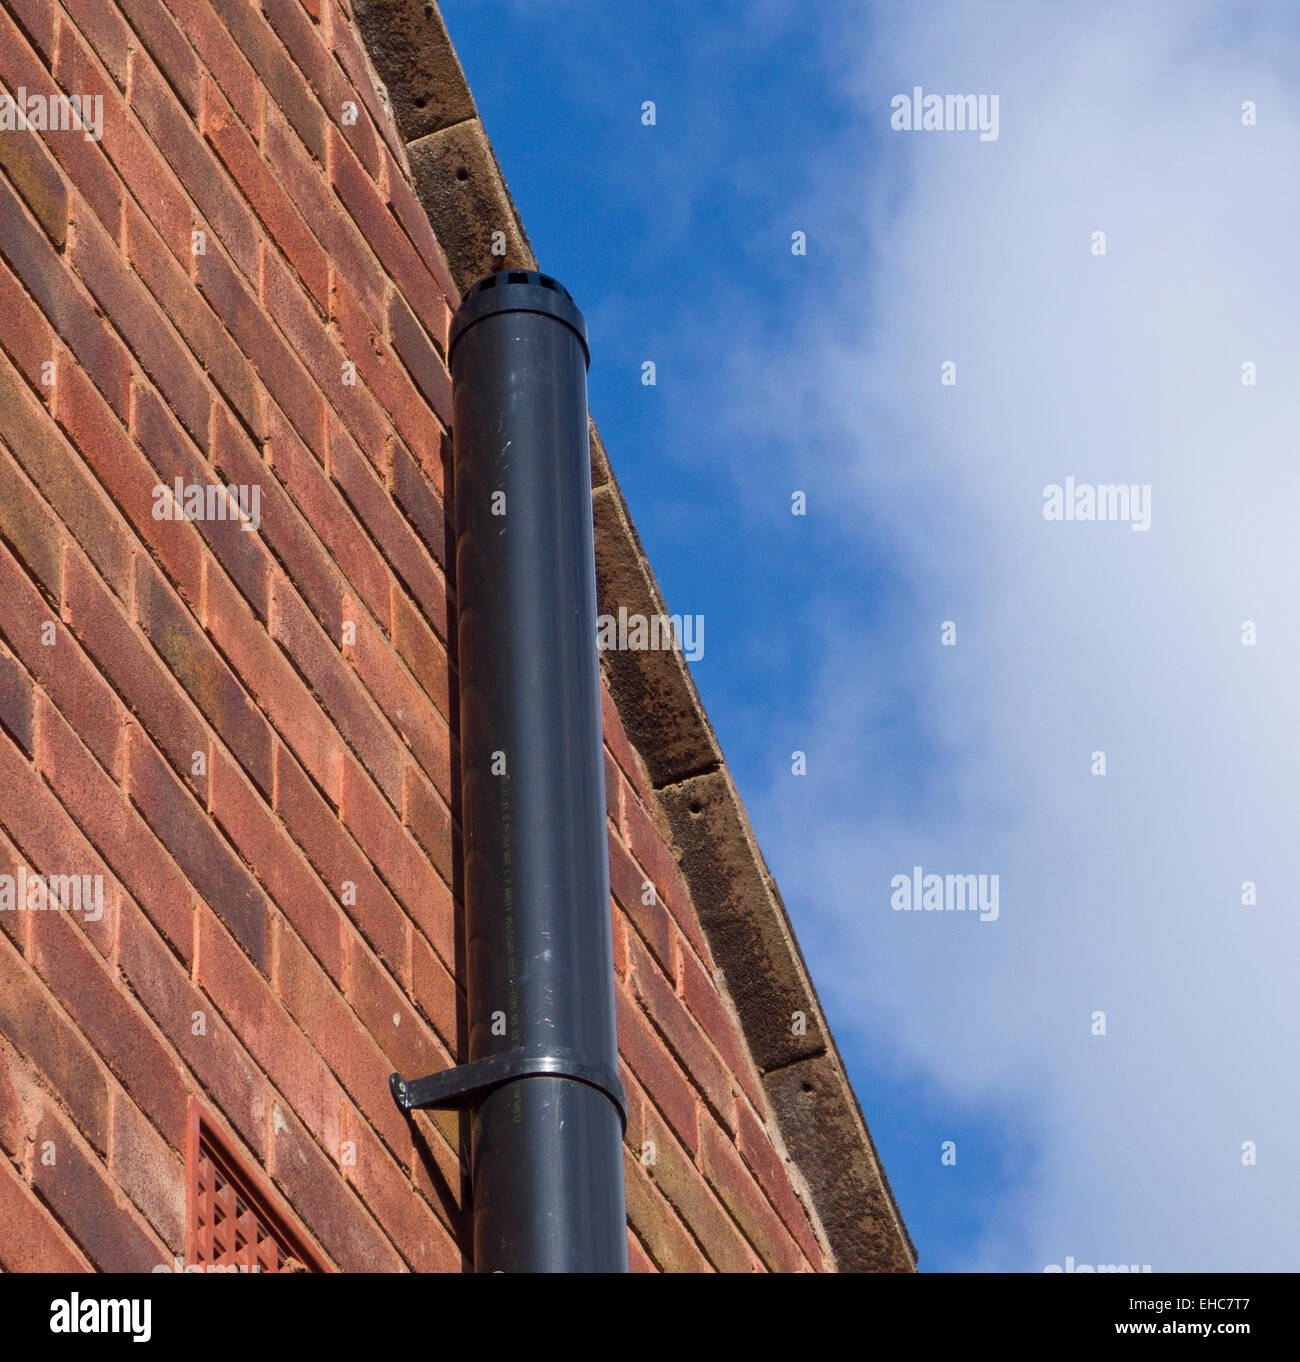 Gable End of a House With External Soil Pipe, UK PROPERTY RELEASED Stock Photo